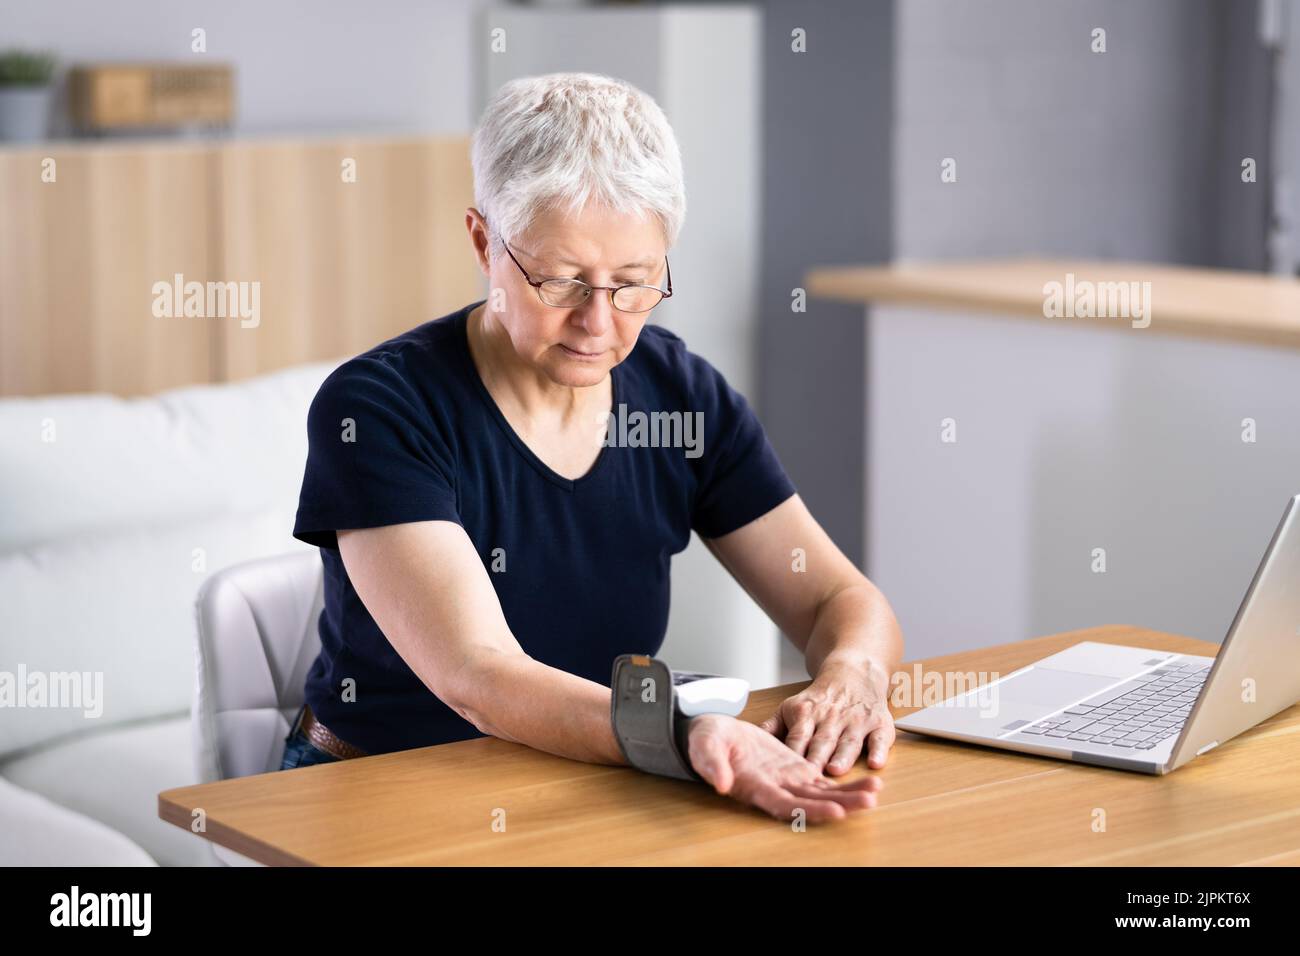 Self Testing Blood Pressure. Medical Healthcare Devices Stock Photo